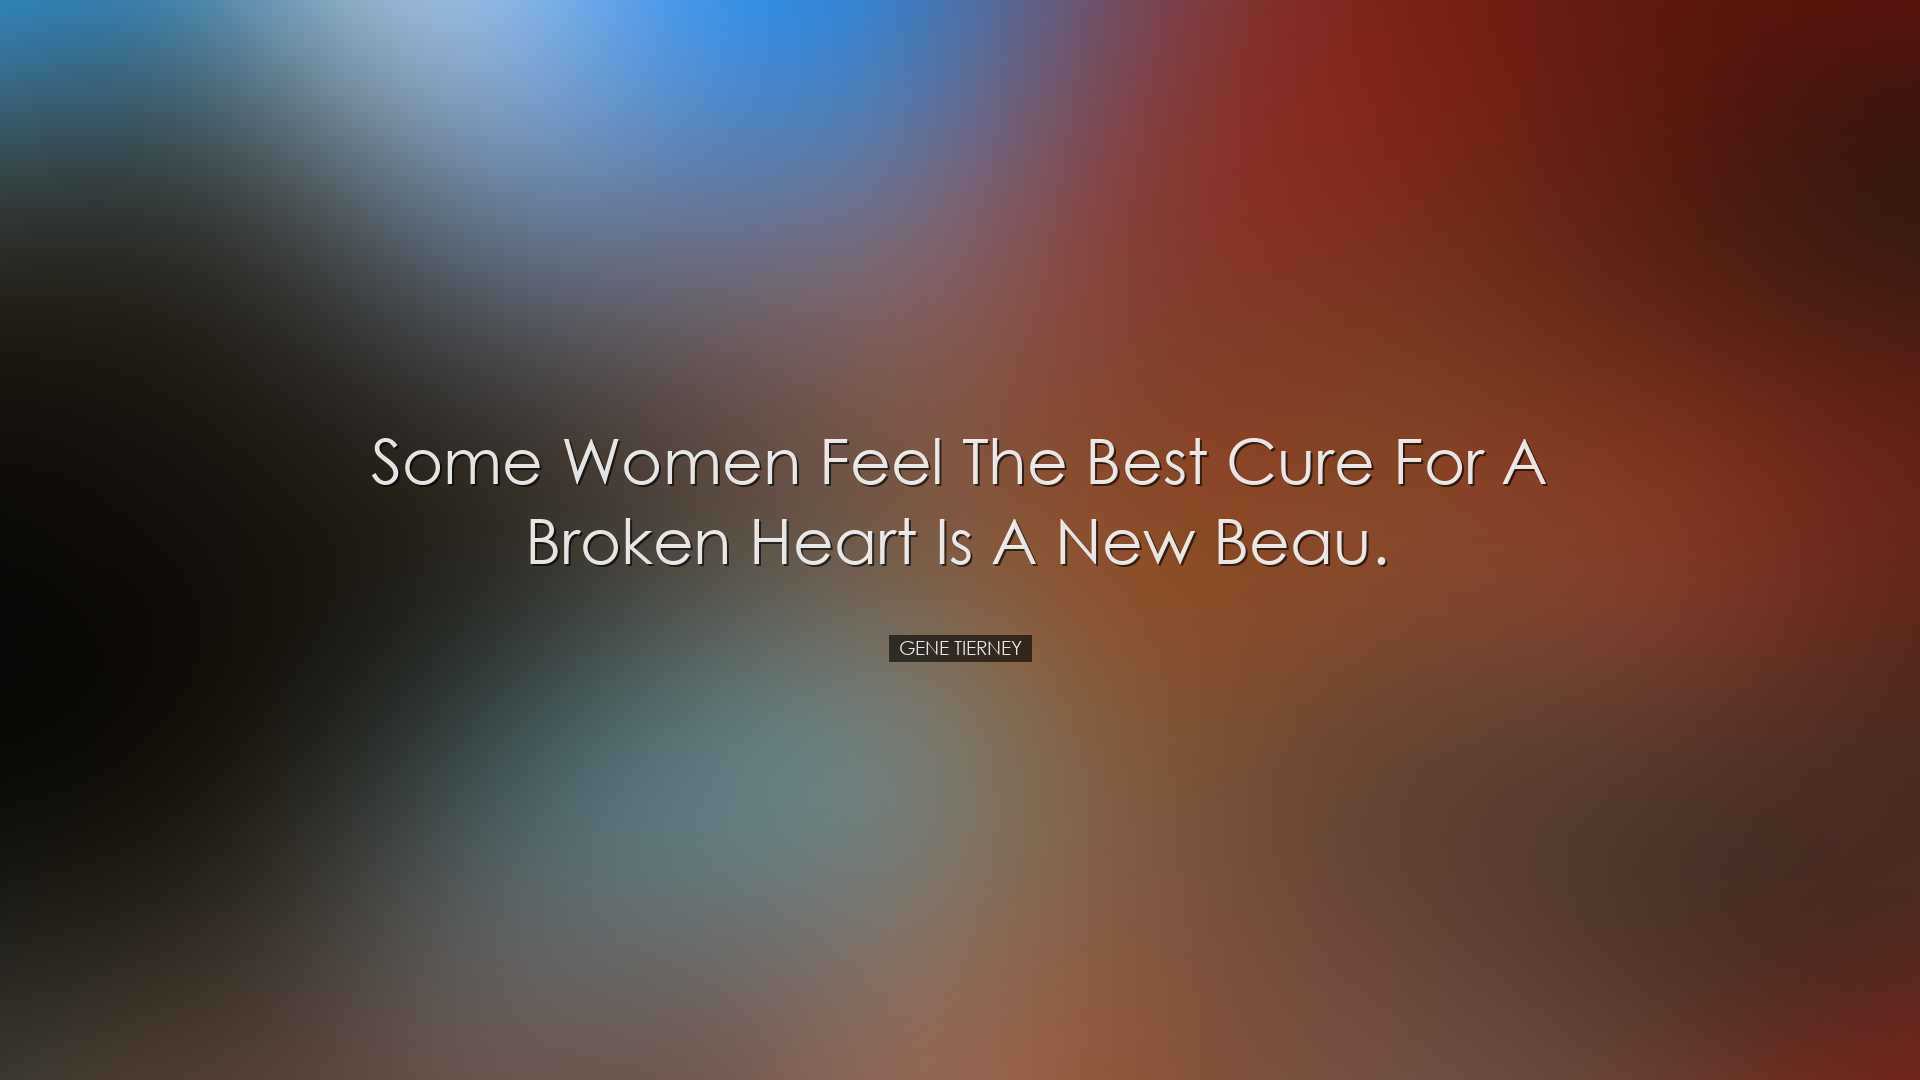 Some women feel the best cure for a broken heart is a new beau. -